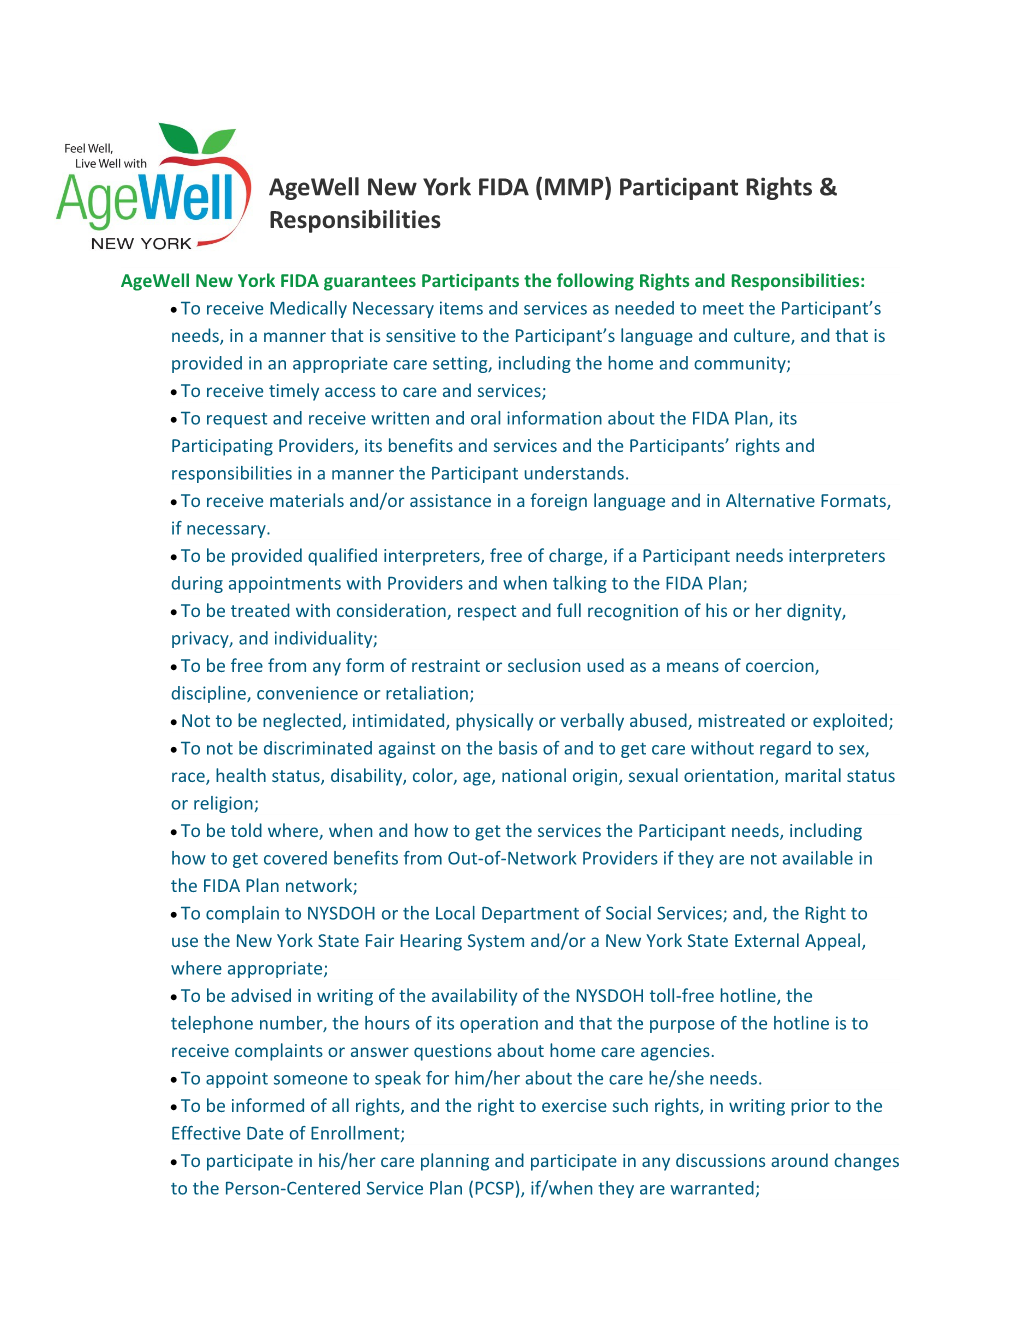 Agewell New York FIDA (MMP) Participant Rights & Responsibilities